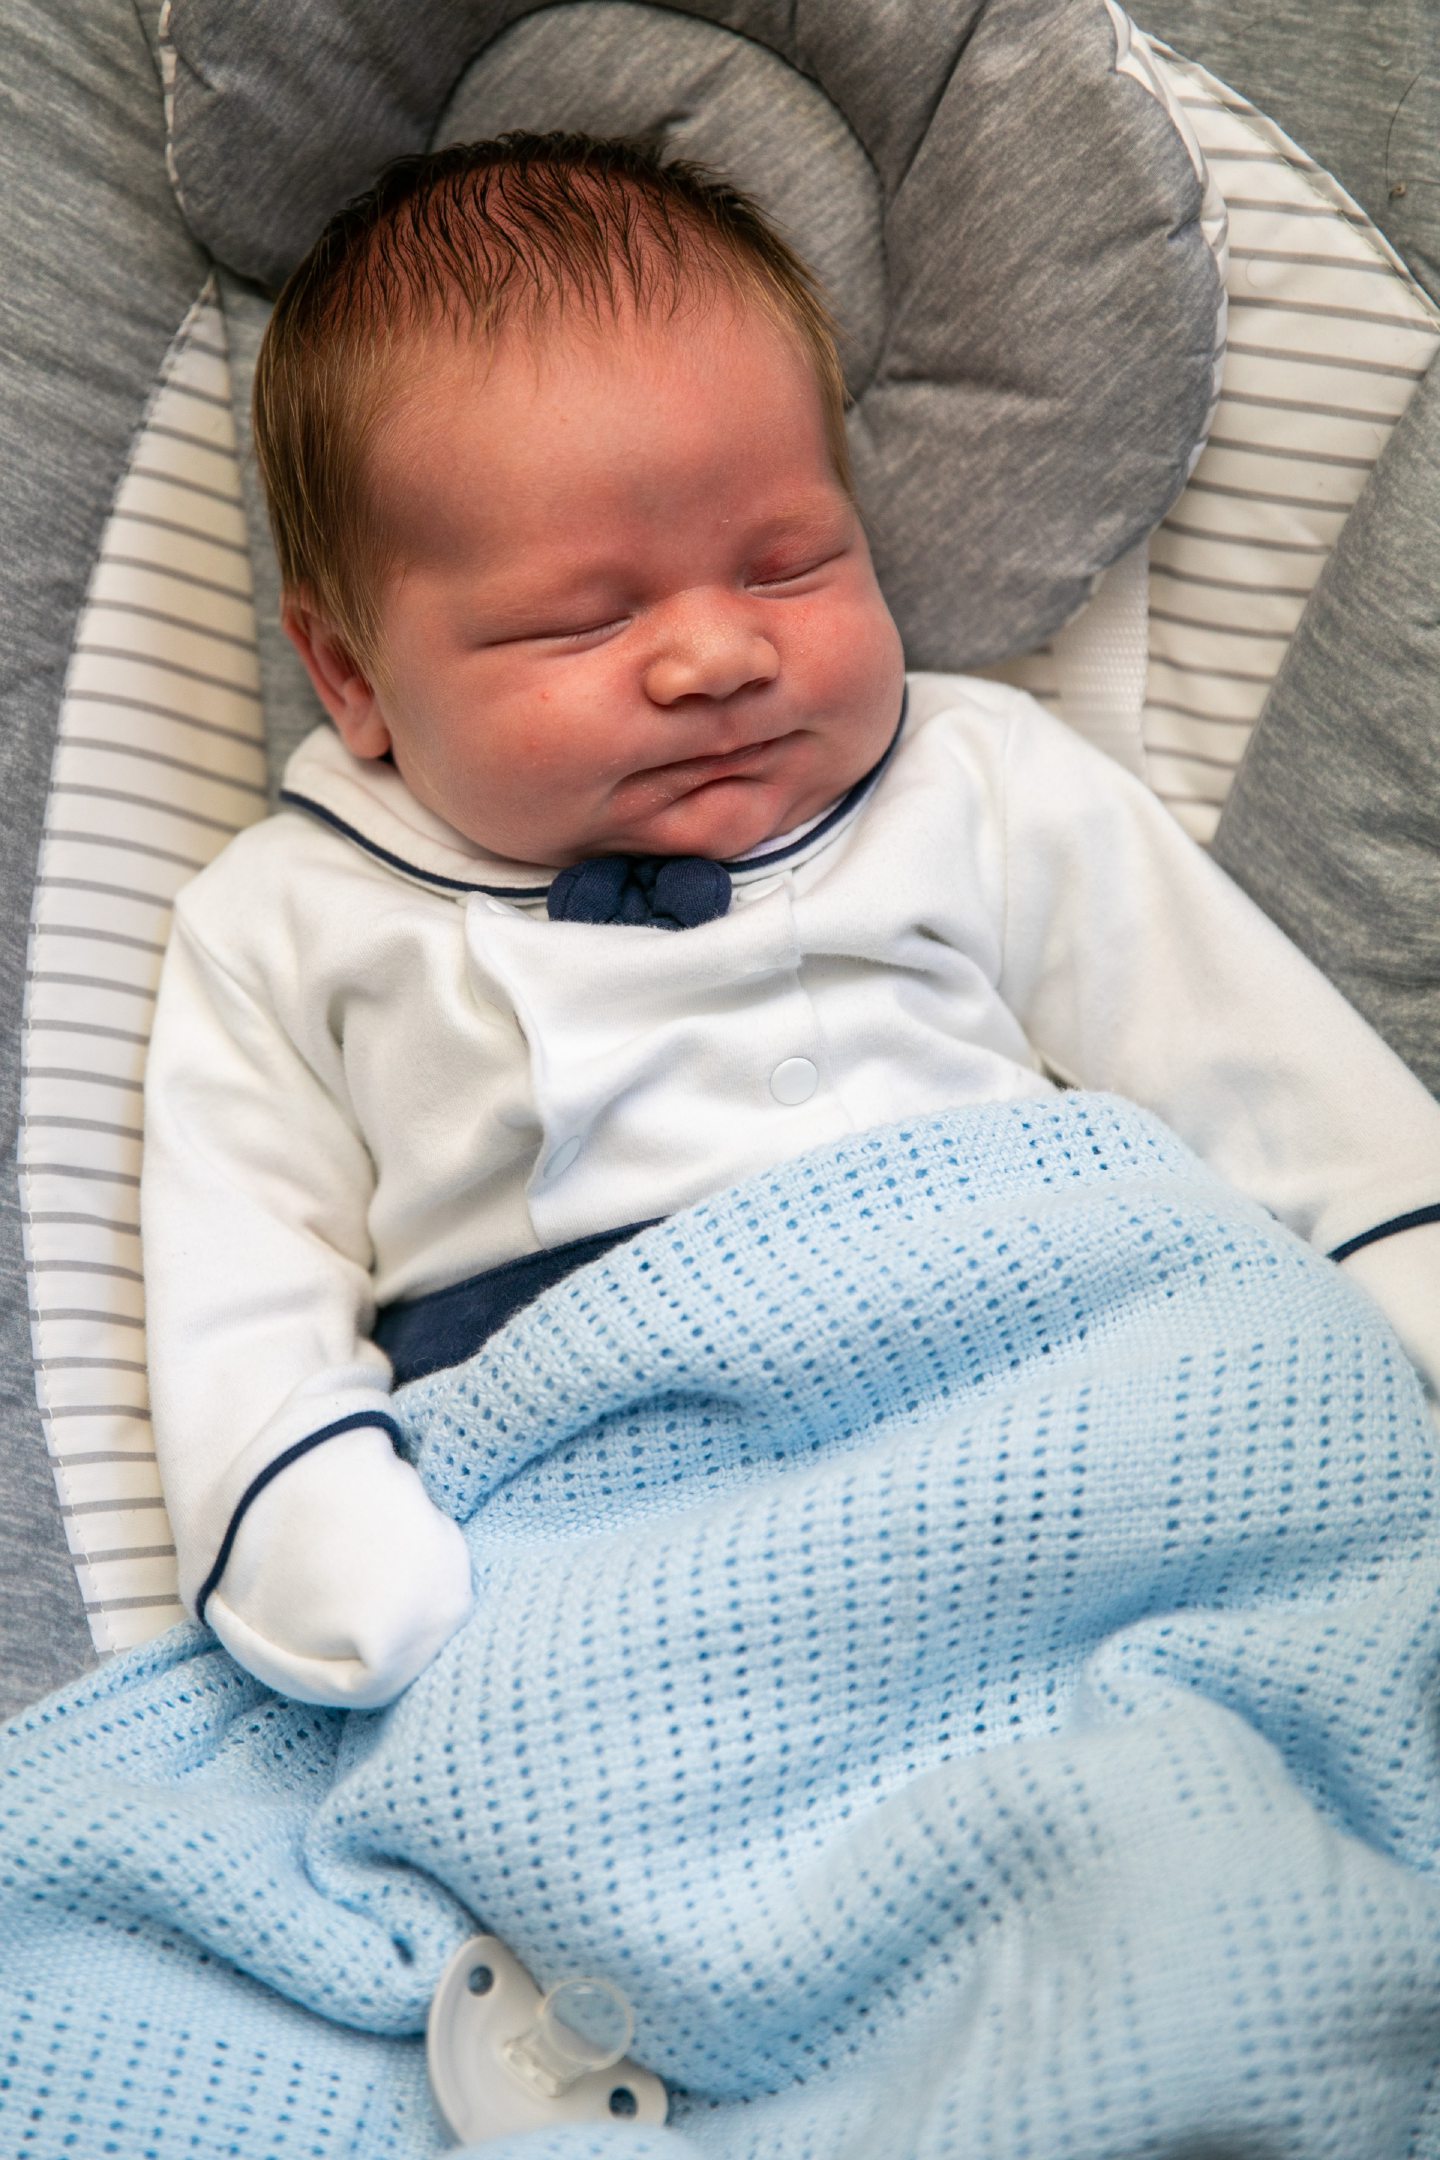 Kayden weighed 10lbs 12oz when he was born. Image: Steve Brown/DC Thomson.